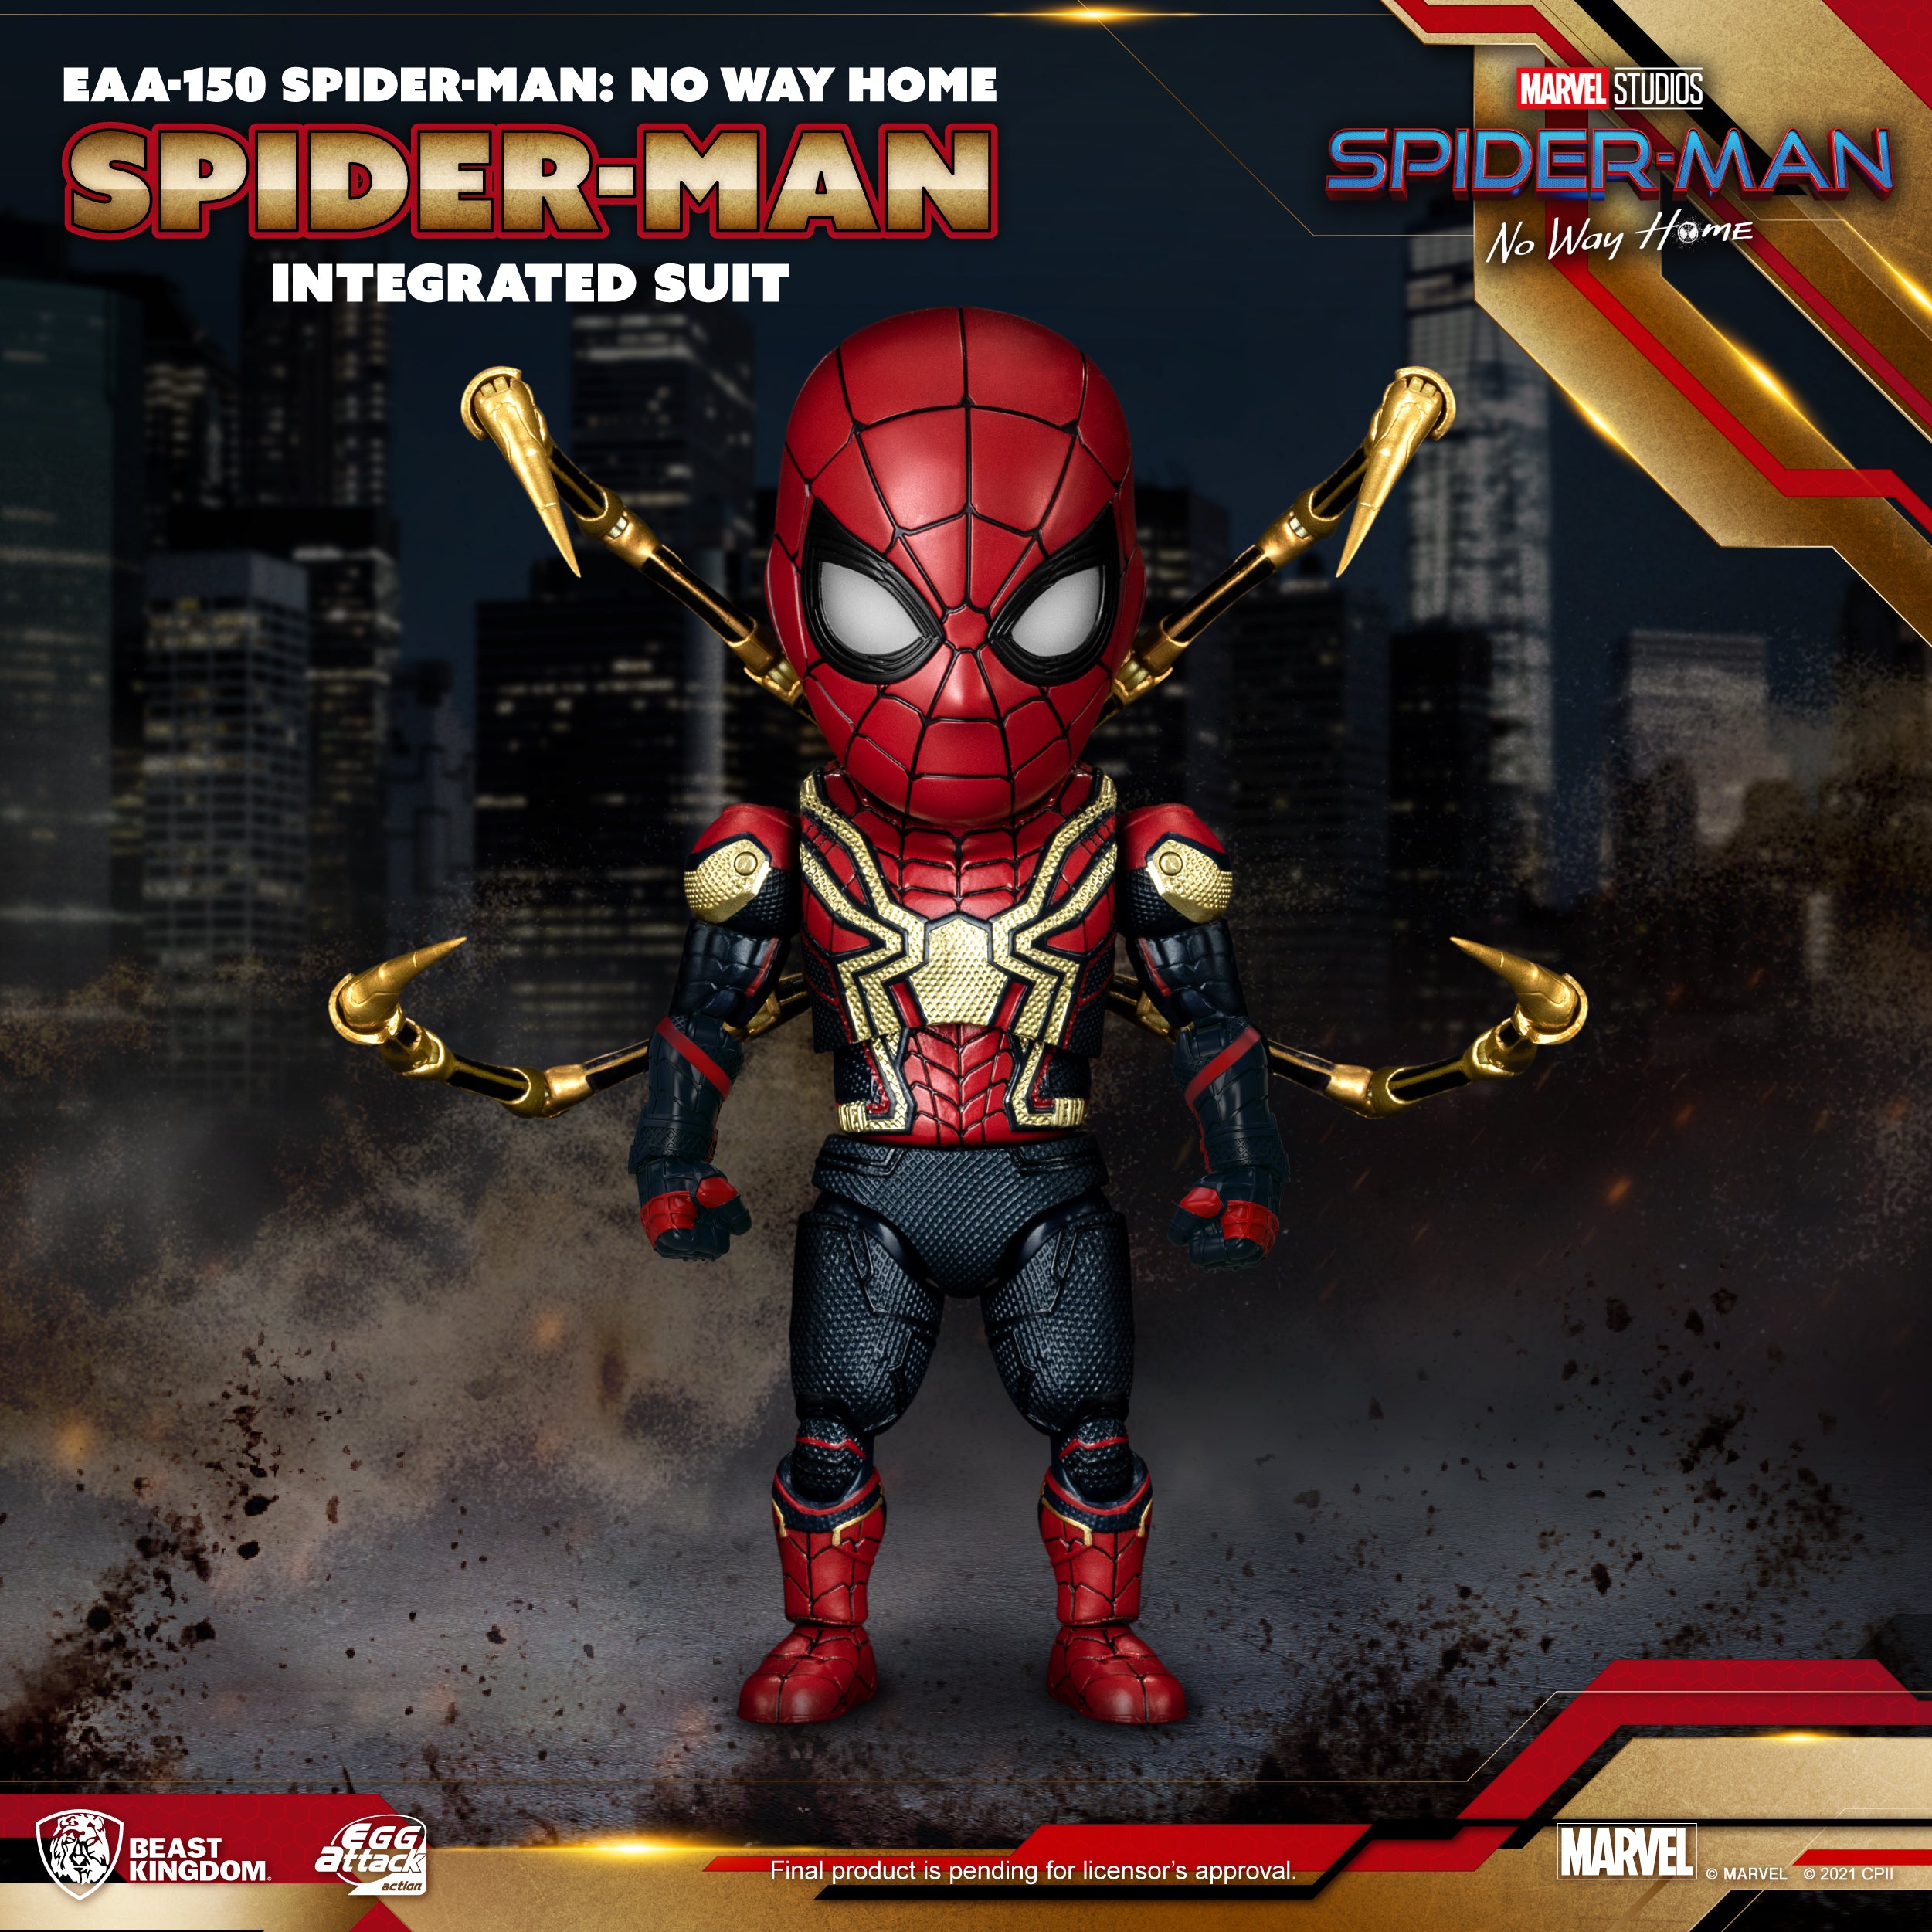 Beast Kingdom EAA-150 Marvel Spider-Man: No Way Home Spider-Man Integrated Suit Egg Attack Action Figure